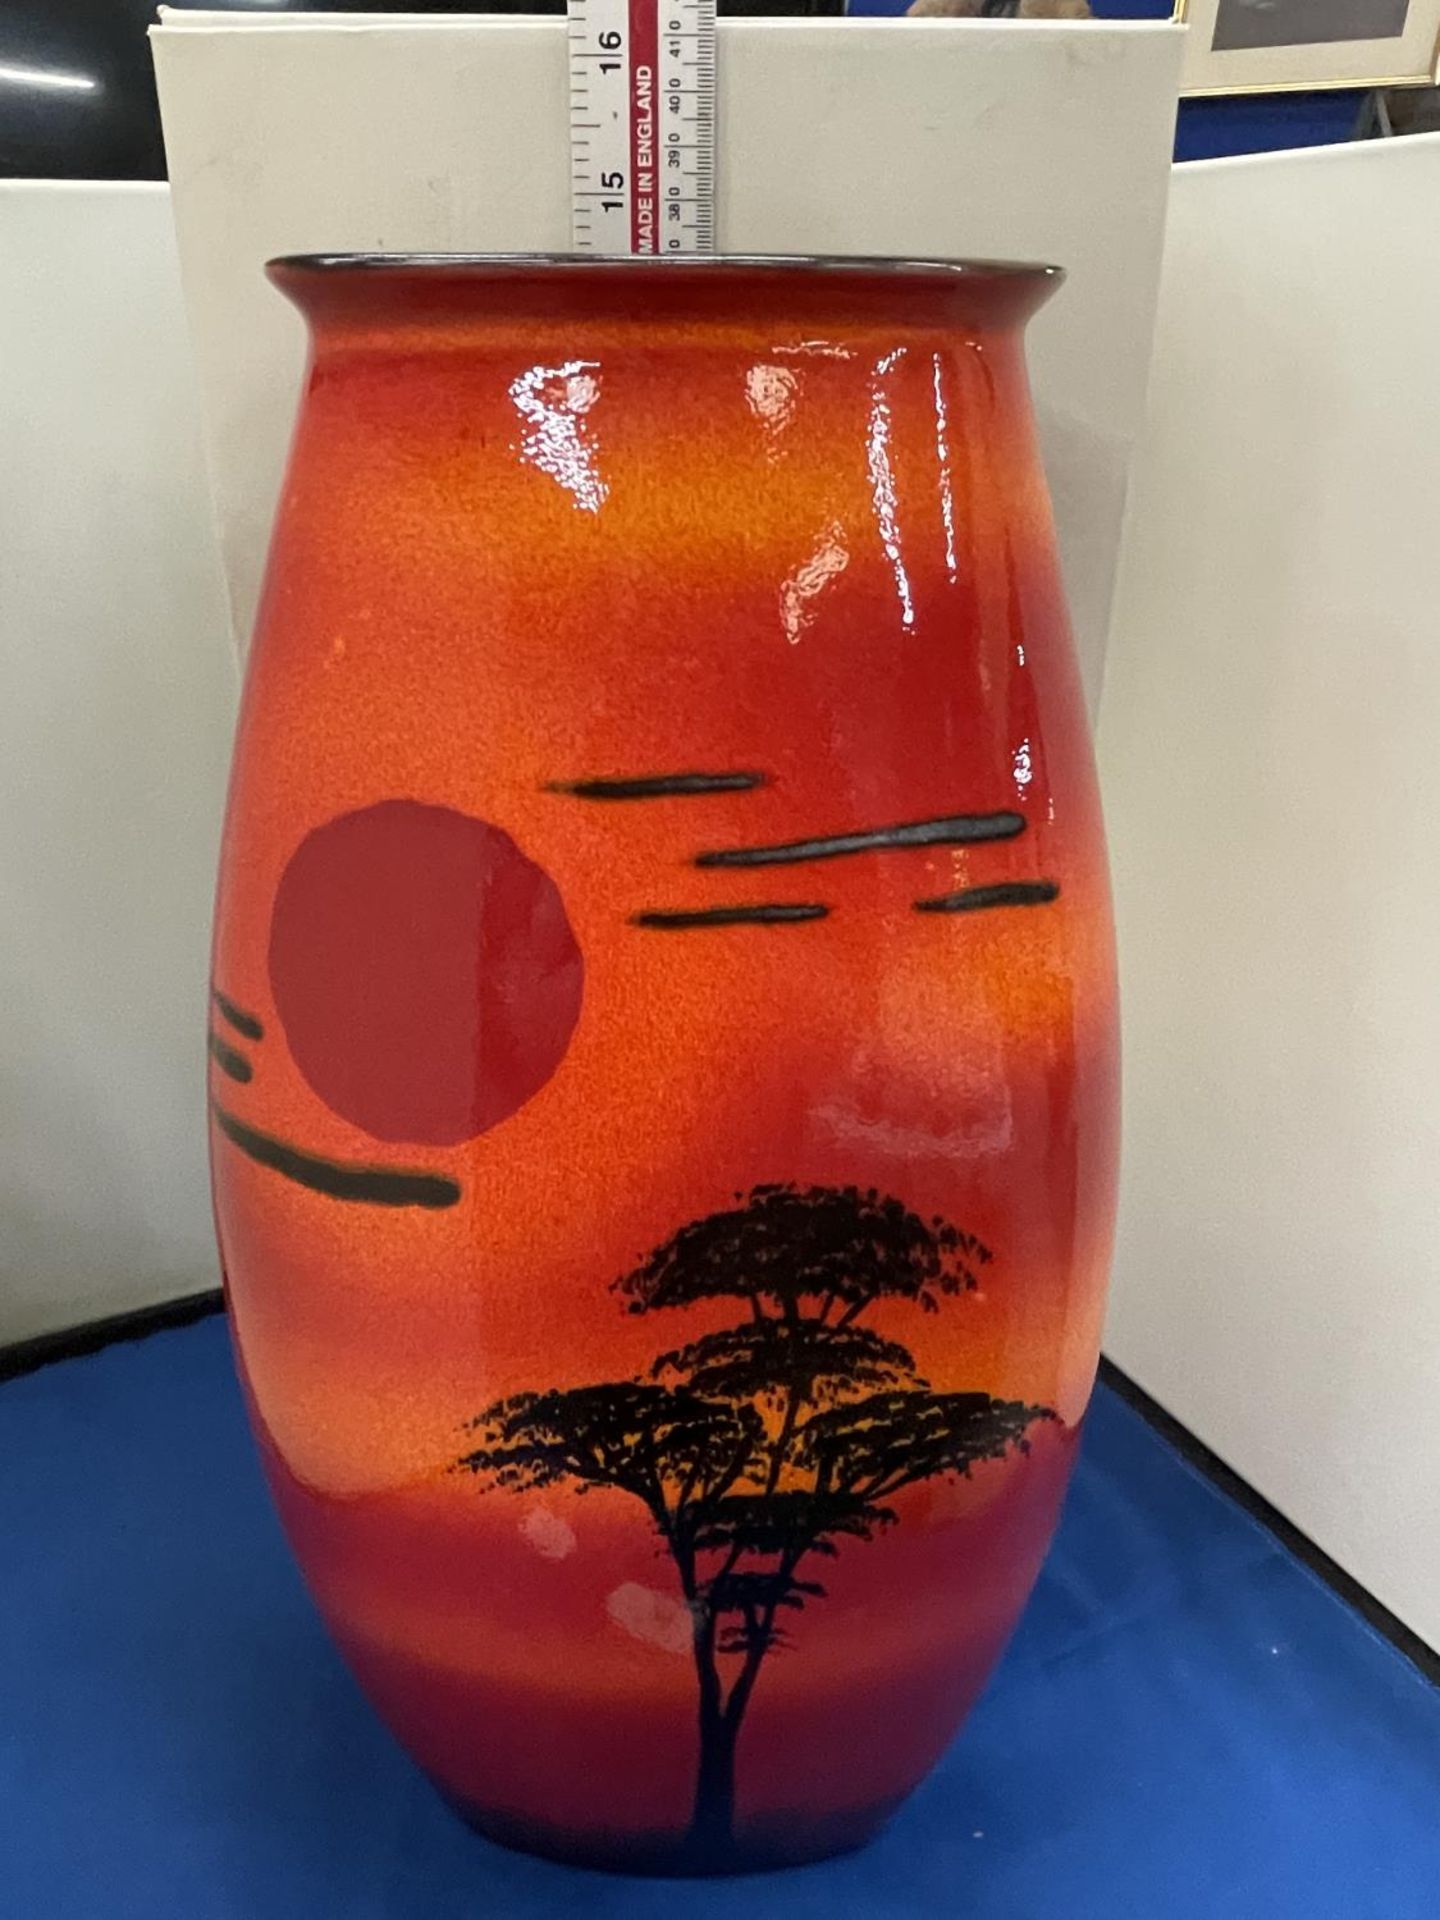 A POOLE POTTERY MANHATTON VASE WITH AFRICAN SKY DESIGN 36CM TALL WITH ORIGINAL BOX - Image 9 of 10